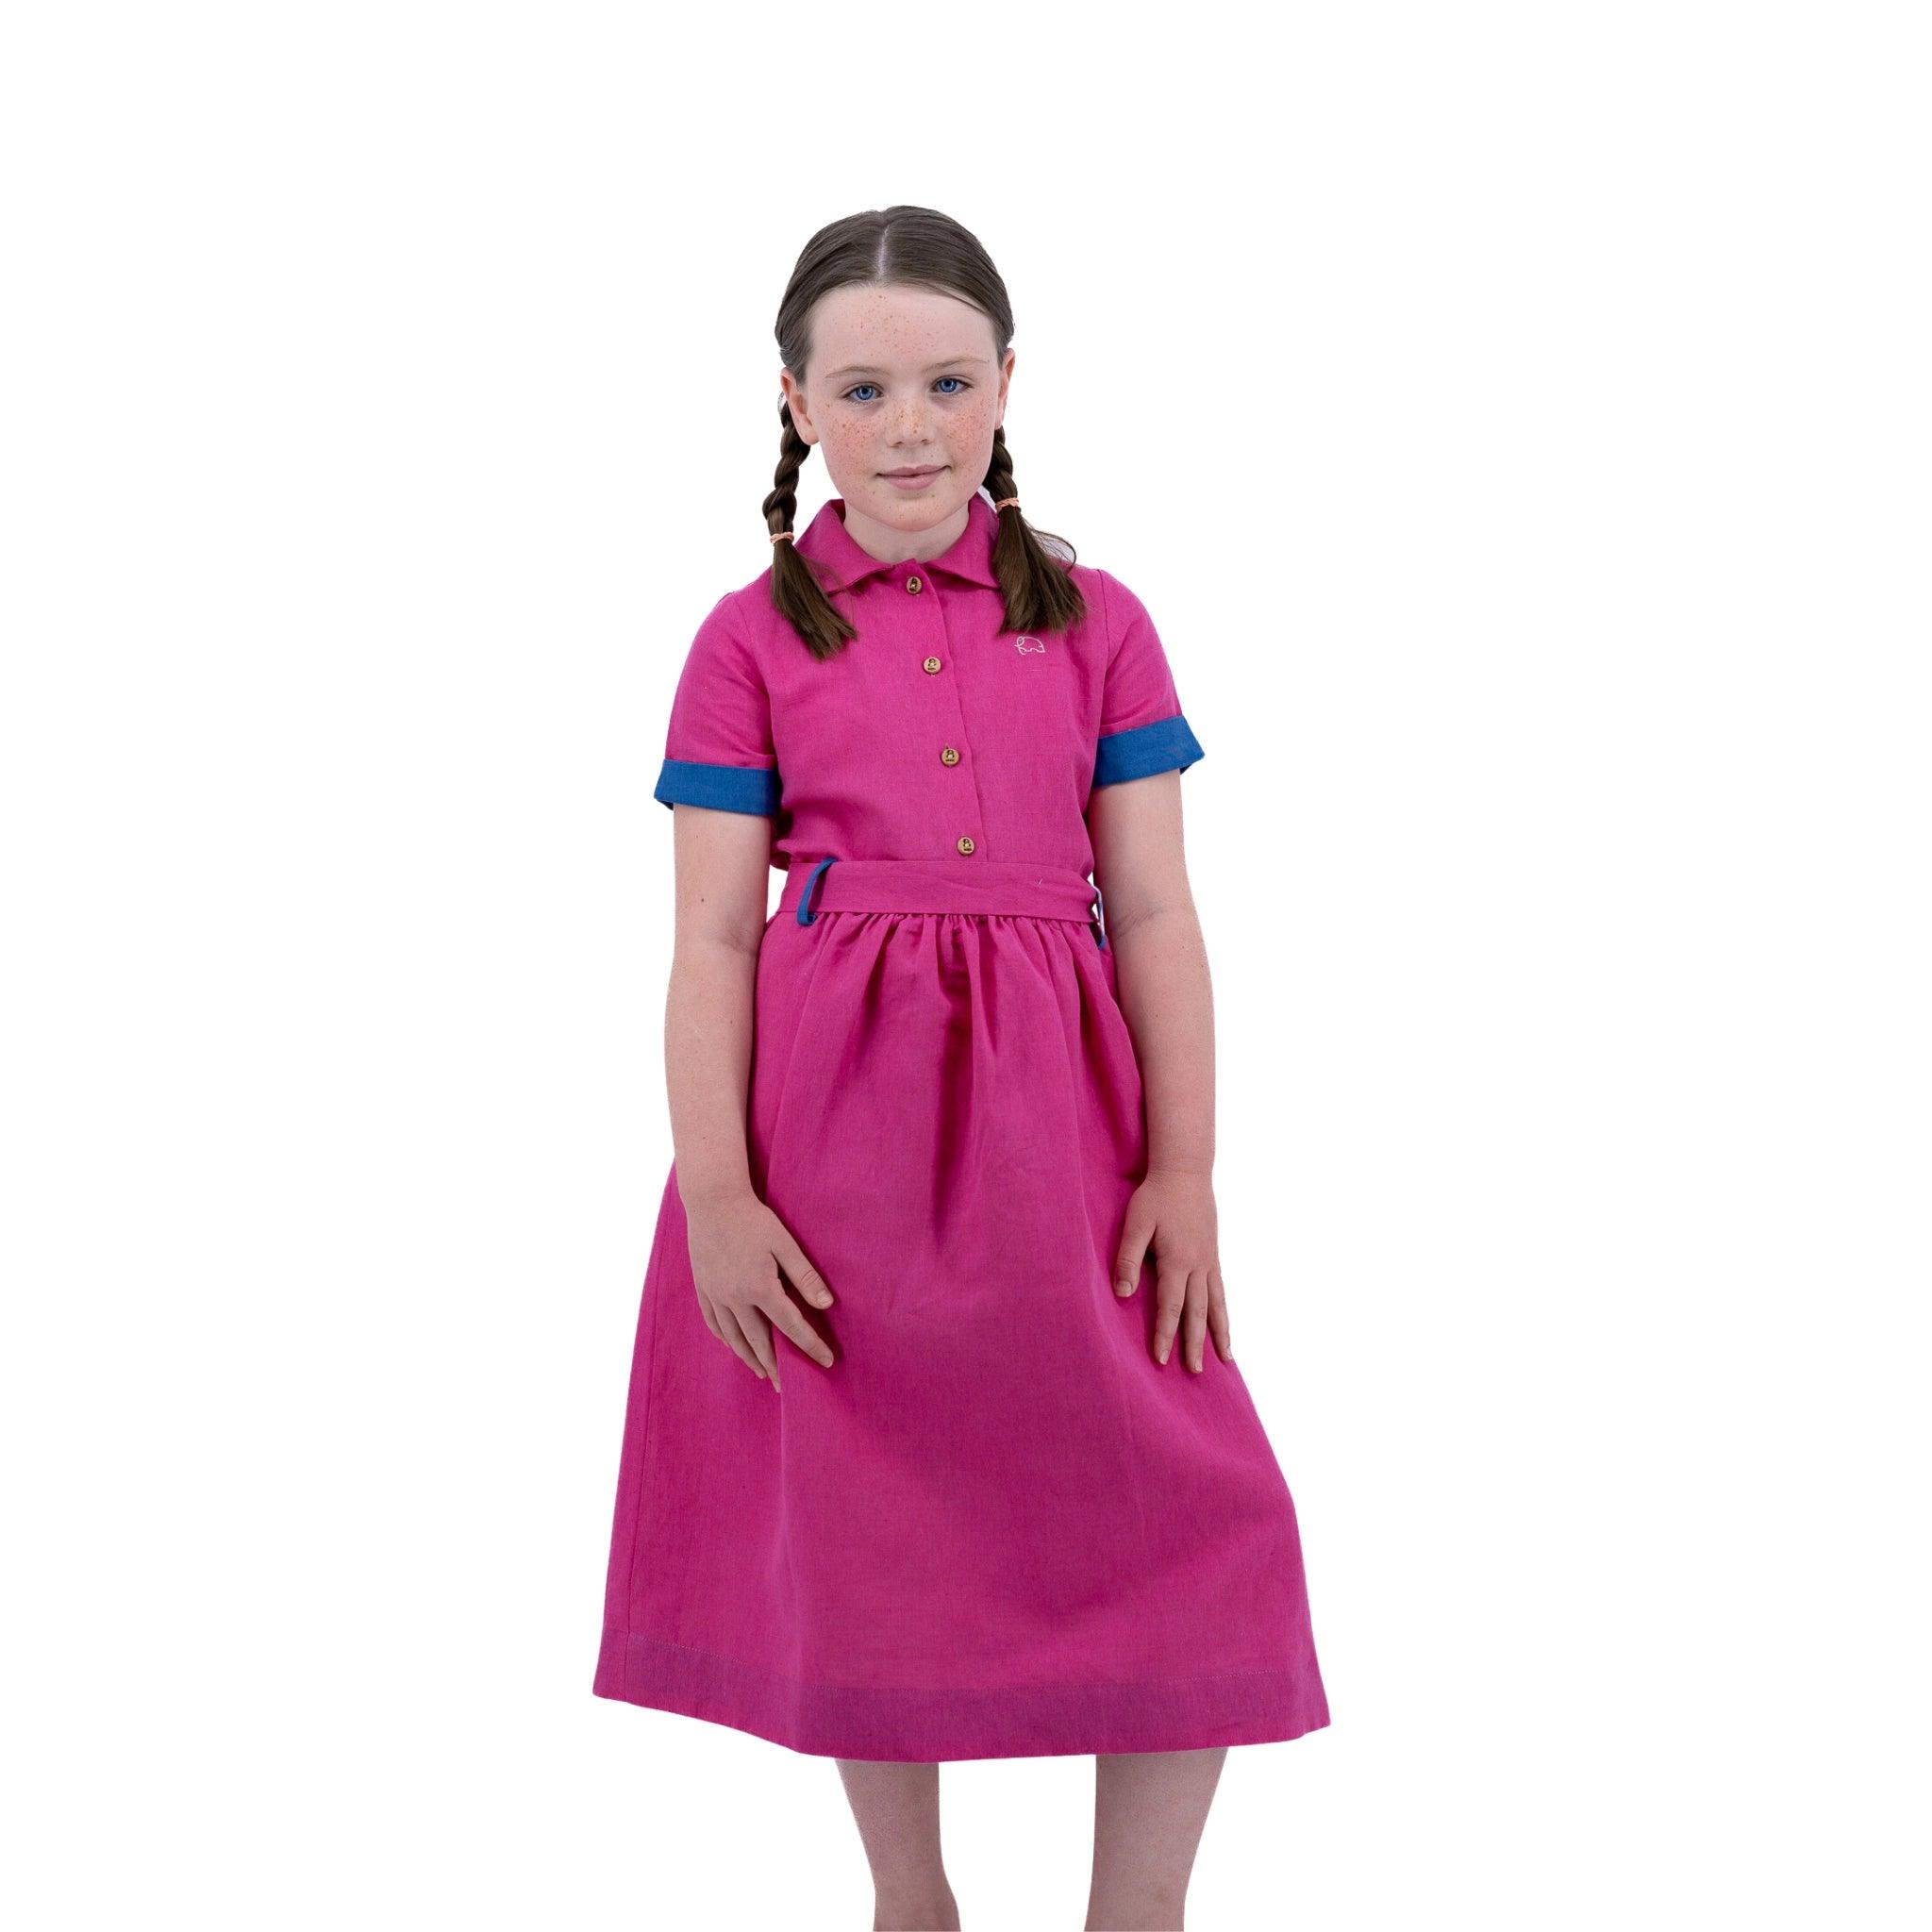 Young girl in a Karee fuchsia purple linen dress for girls with blue cuffs, standing with hands on hips and pigtails, isolated on a white background.